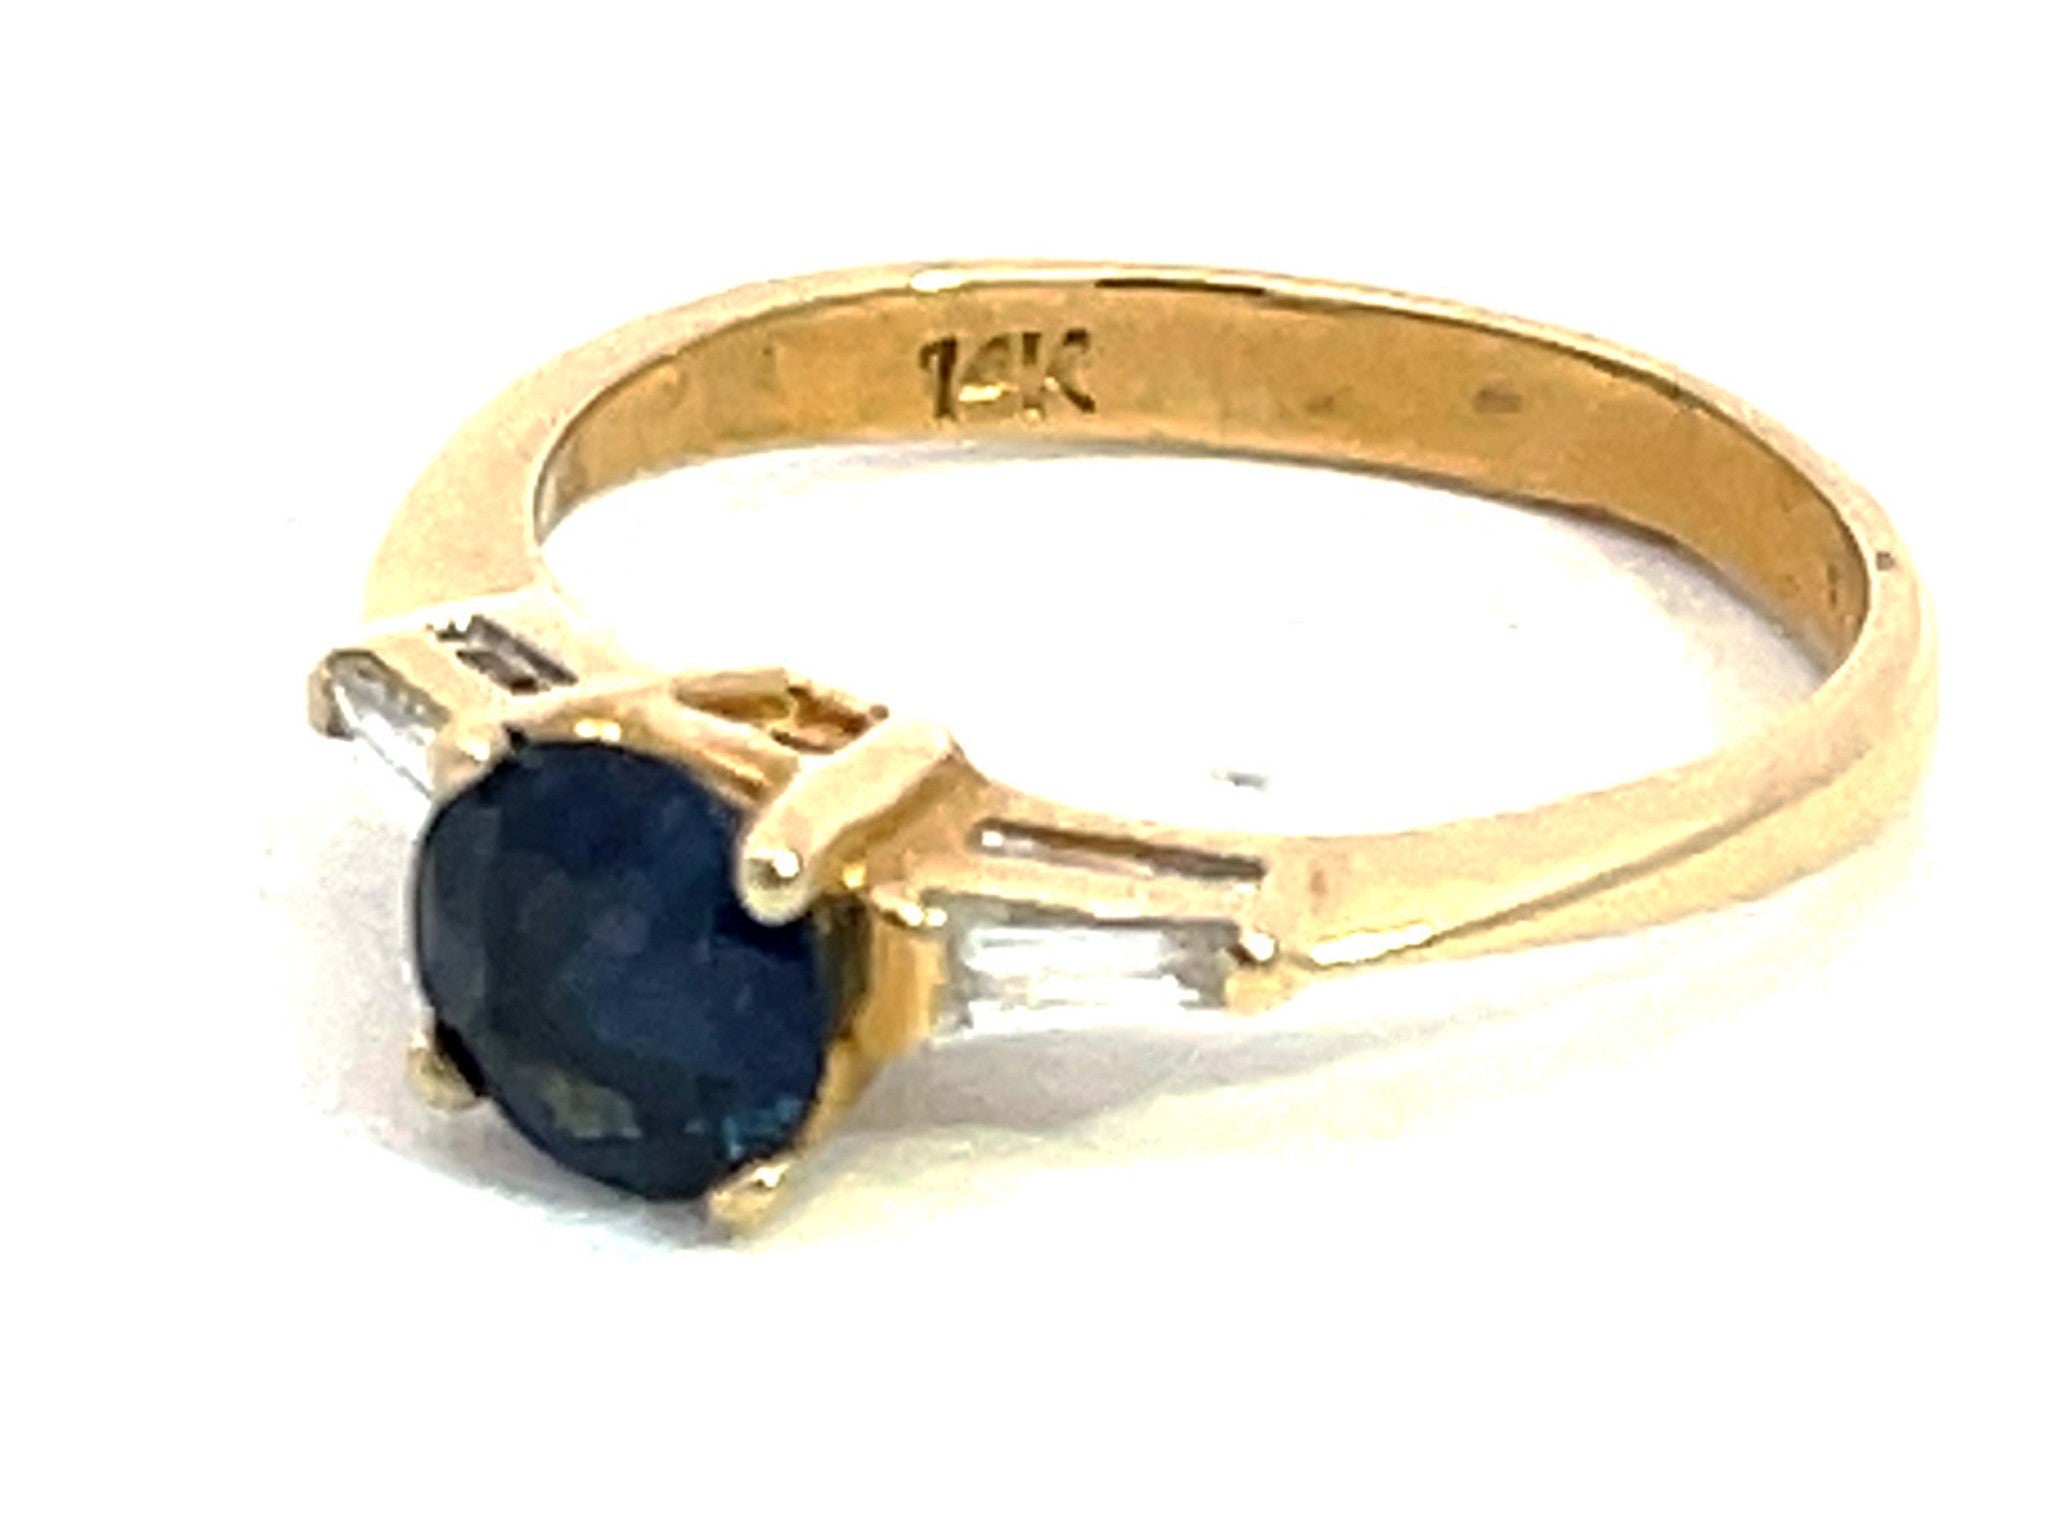 Solitaire Blue Sapphire with Baguette Diamond Accents Ring in 14k Yellow Gold